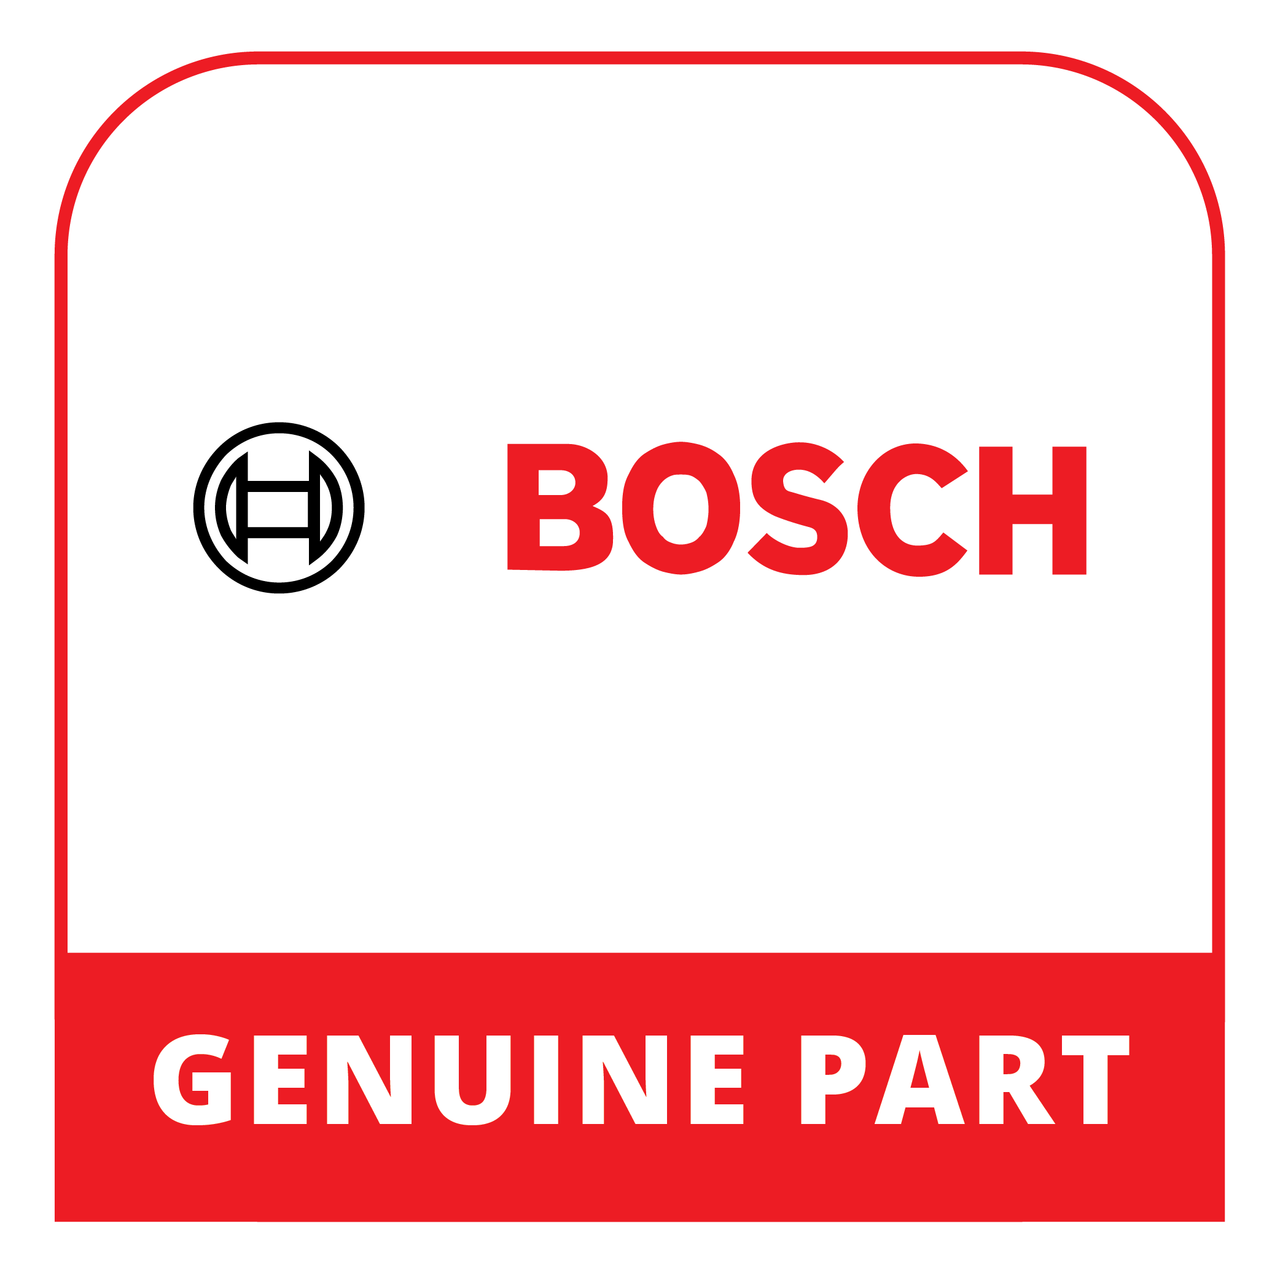 Bosch (Thermador) 11033031 - Hose-Inlet - Genuine Bosch (Thermador) Part